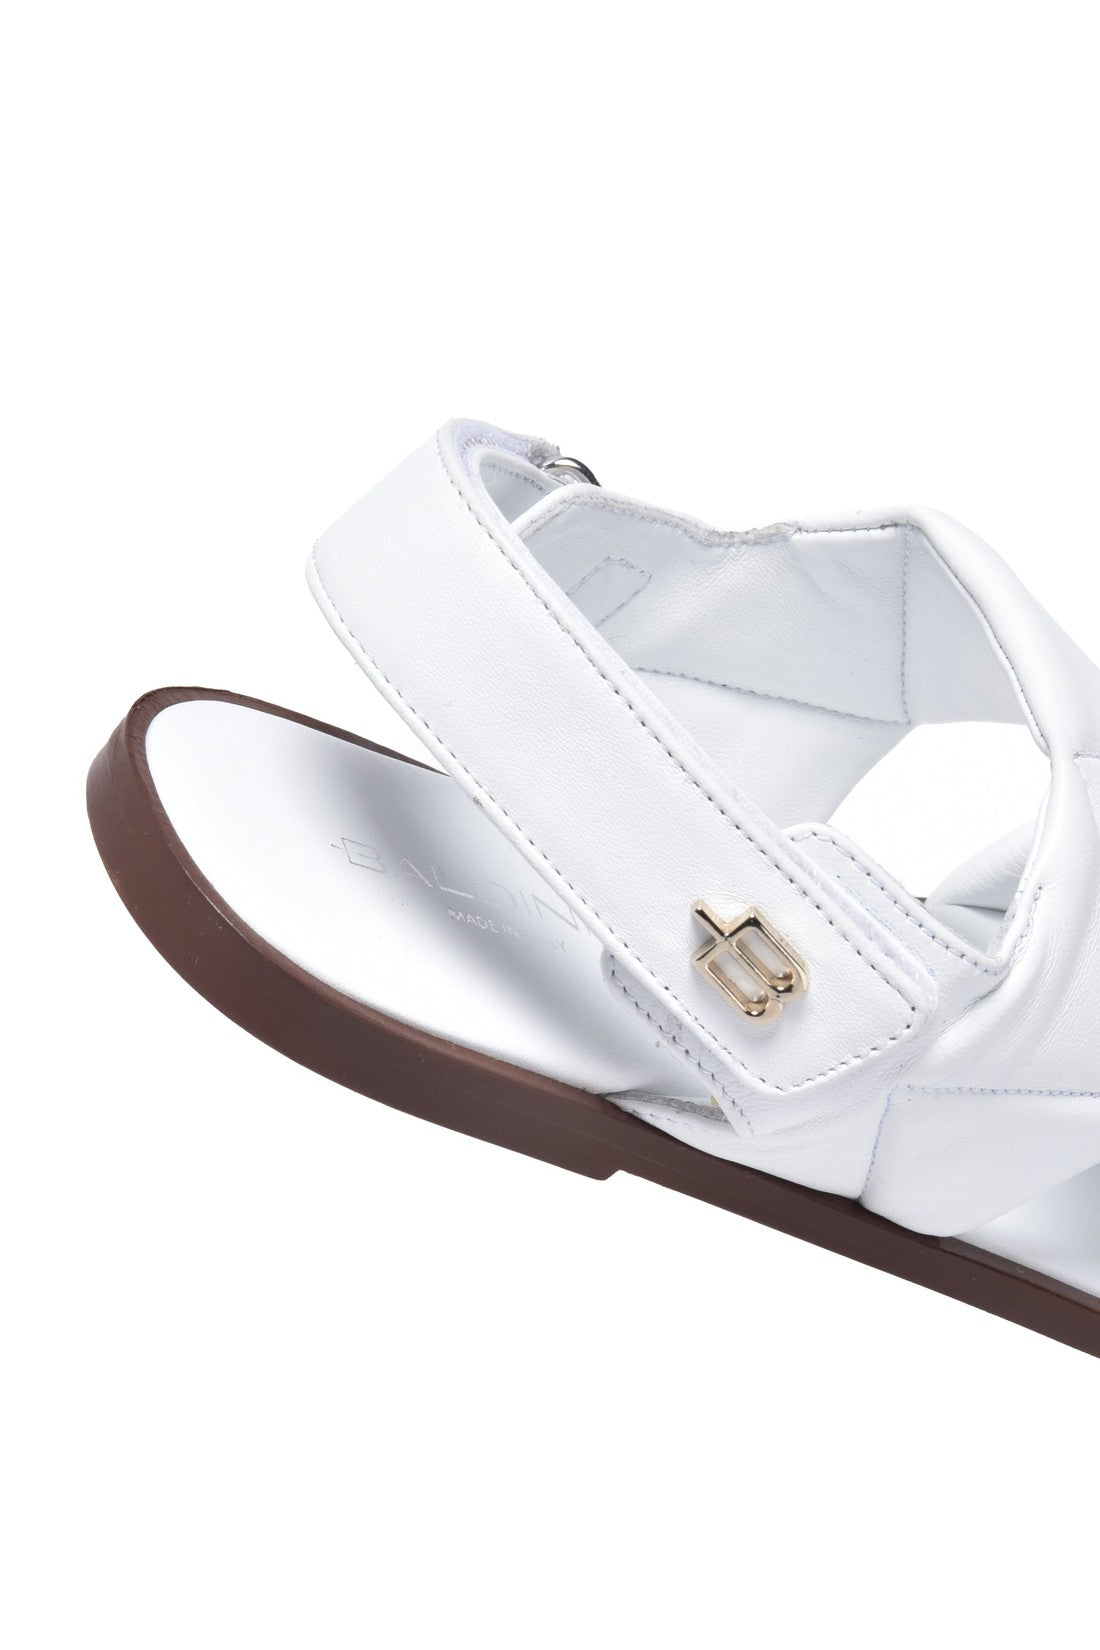 BALDININI-OUTLET-SALE-Sandal-in-white-quilted-leather-Sandalen-ARCHIVE-COLLECTION-4.jpg